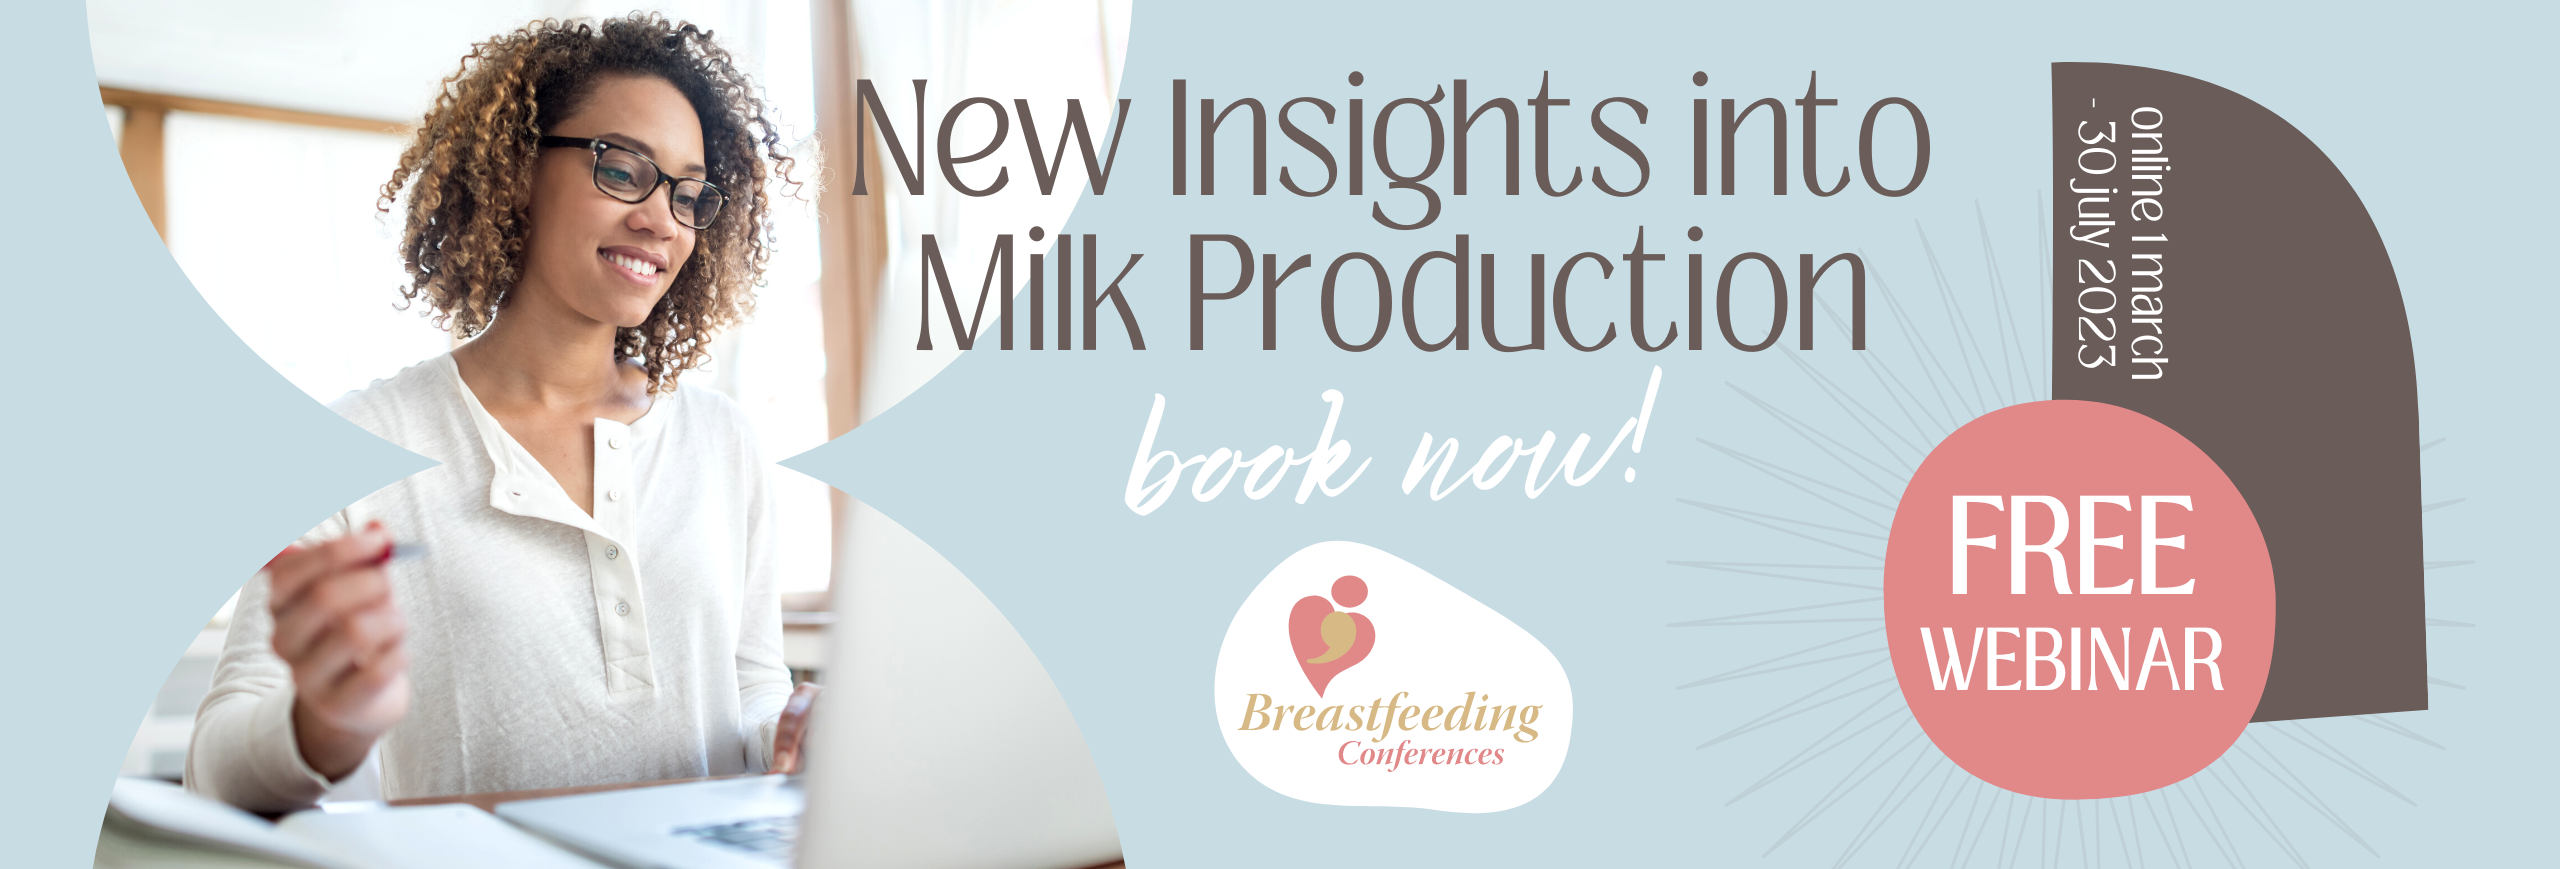 New insights into milk production - Free CERPs!